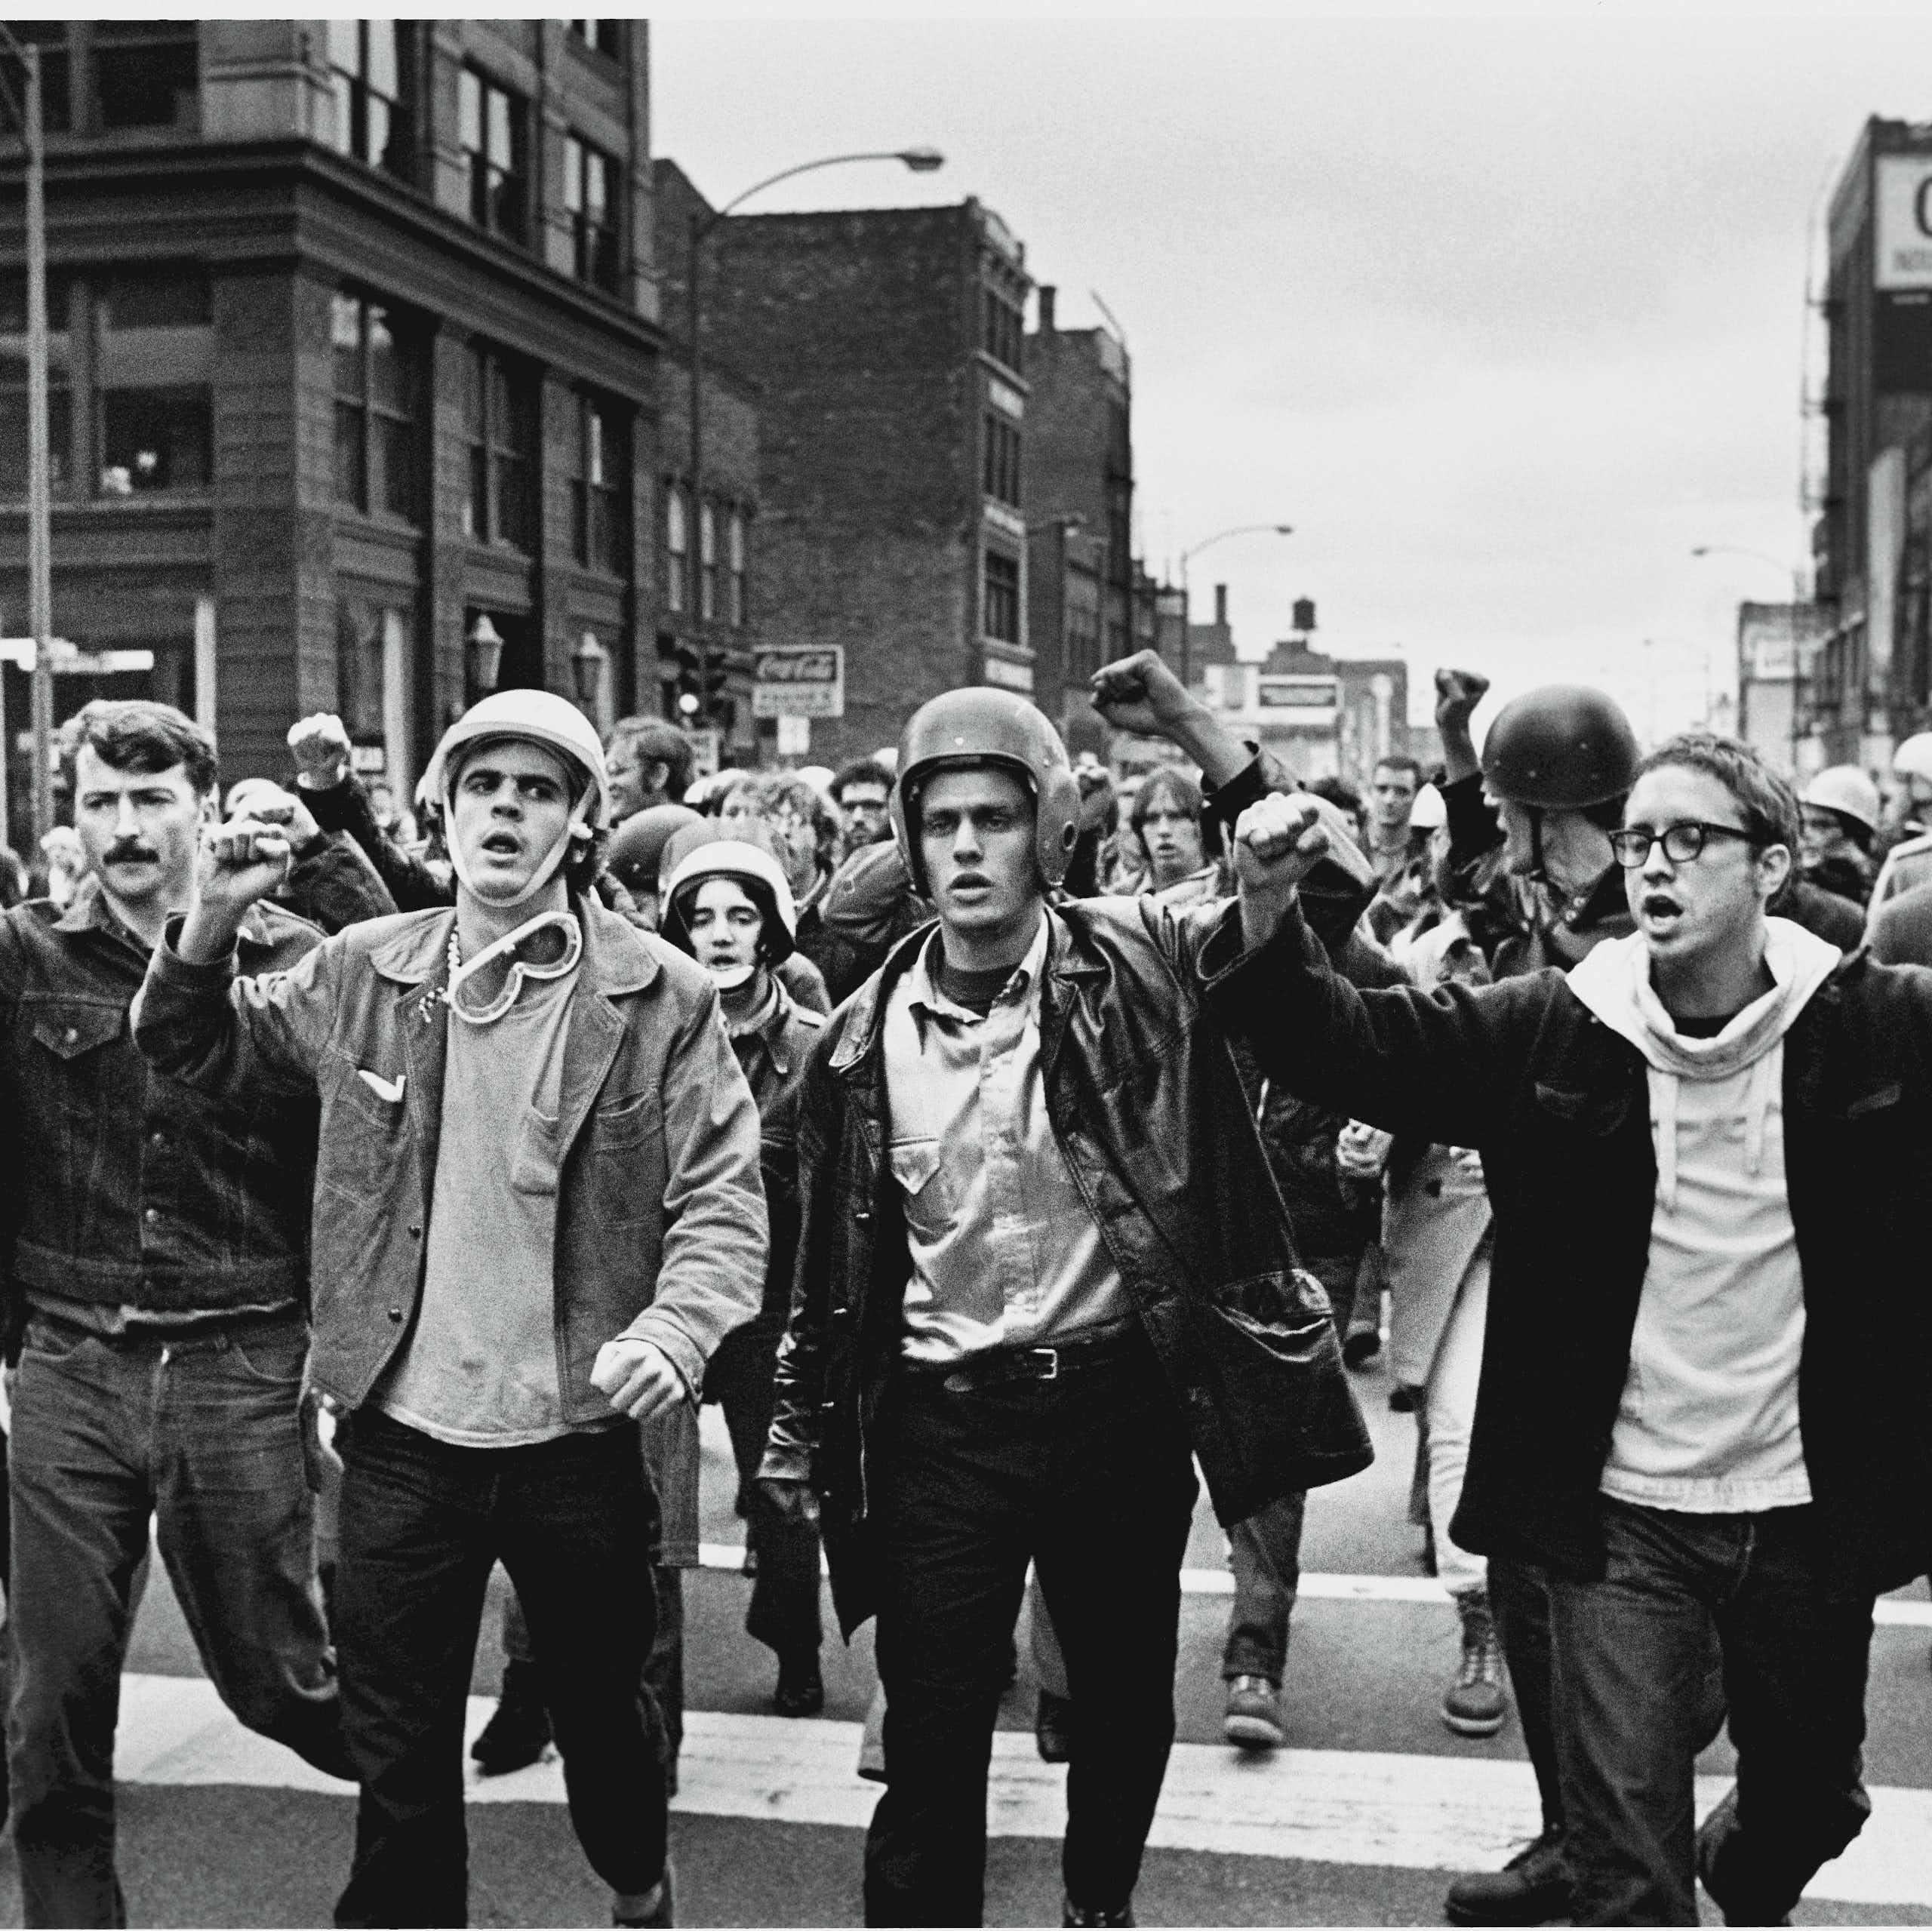 A group of young men, some of them wearing helmets, raise their fists and march down a street in a black and white photo.